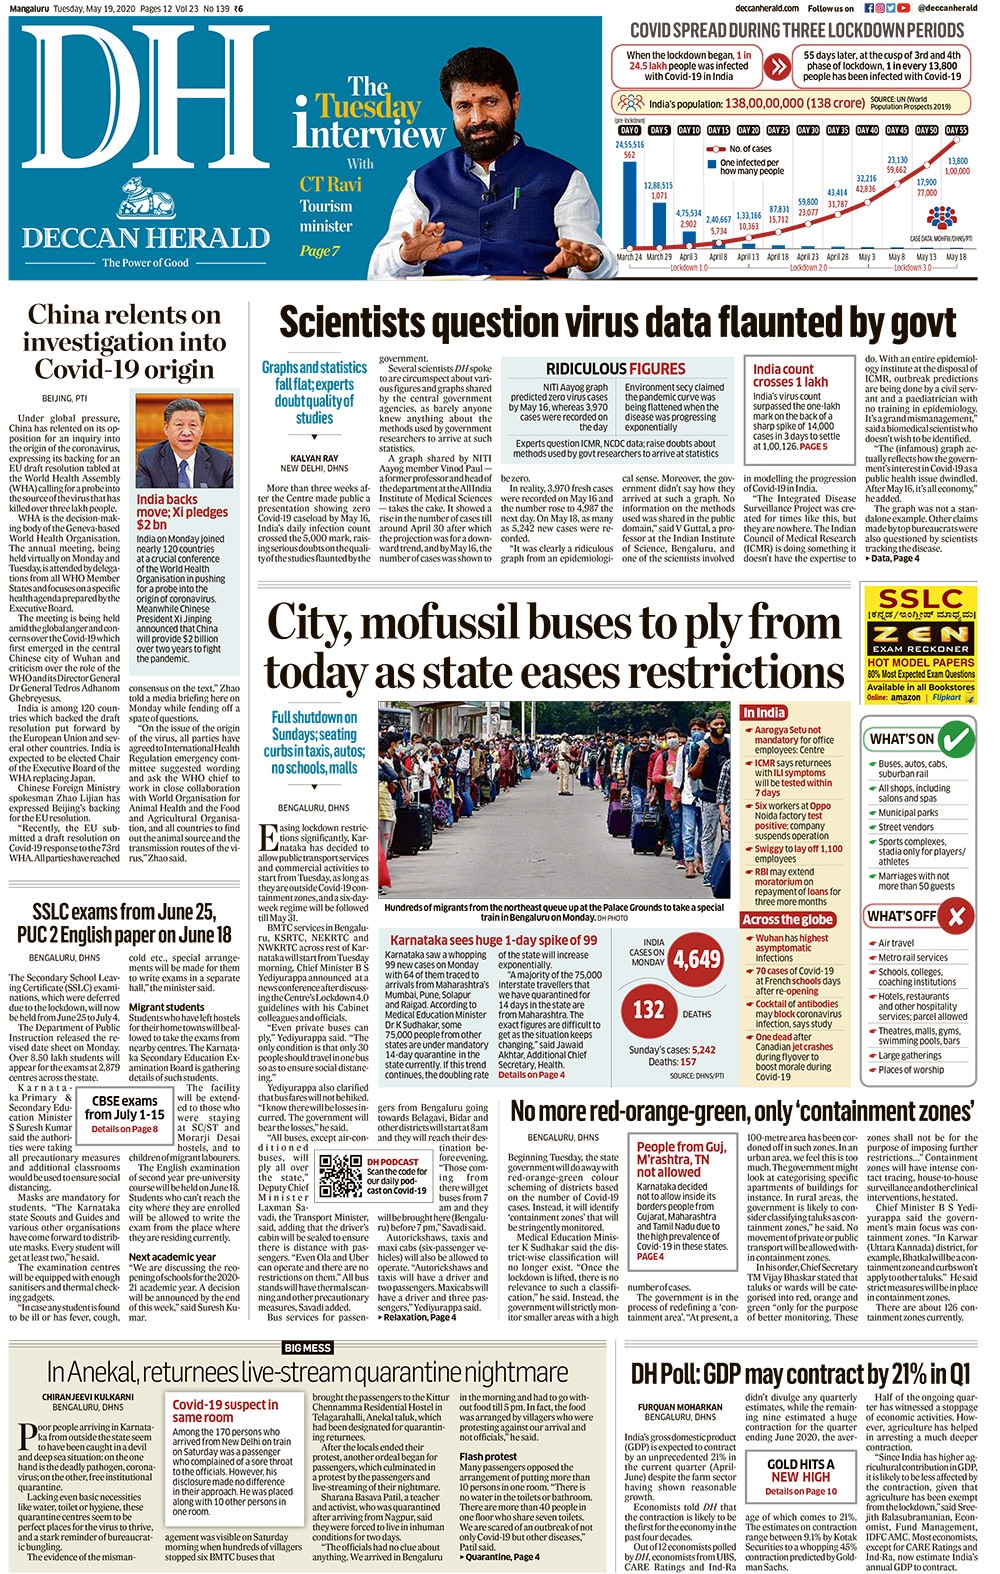 Newspaper Headlines: Coronavirus Cases In India Cross 1 Lakh, Over 3,000 Dead And Other Top Stories